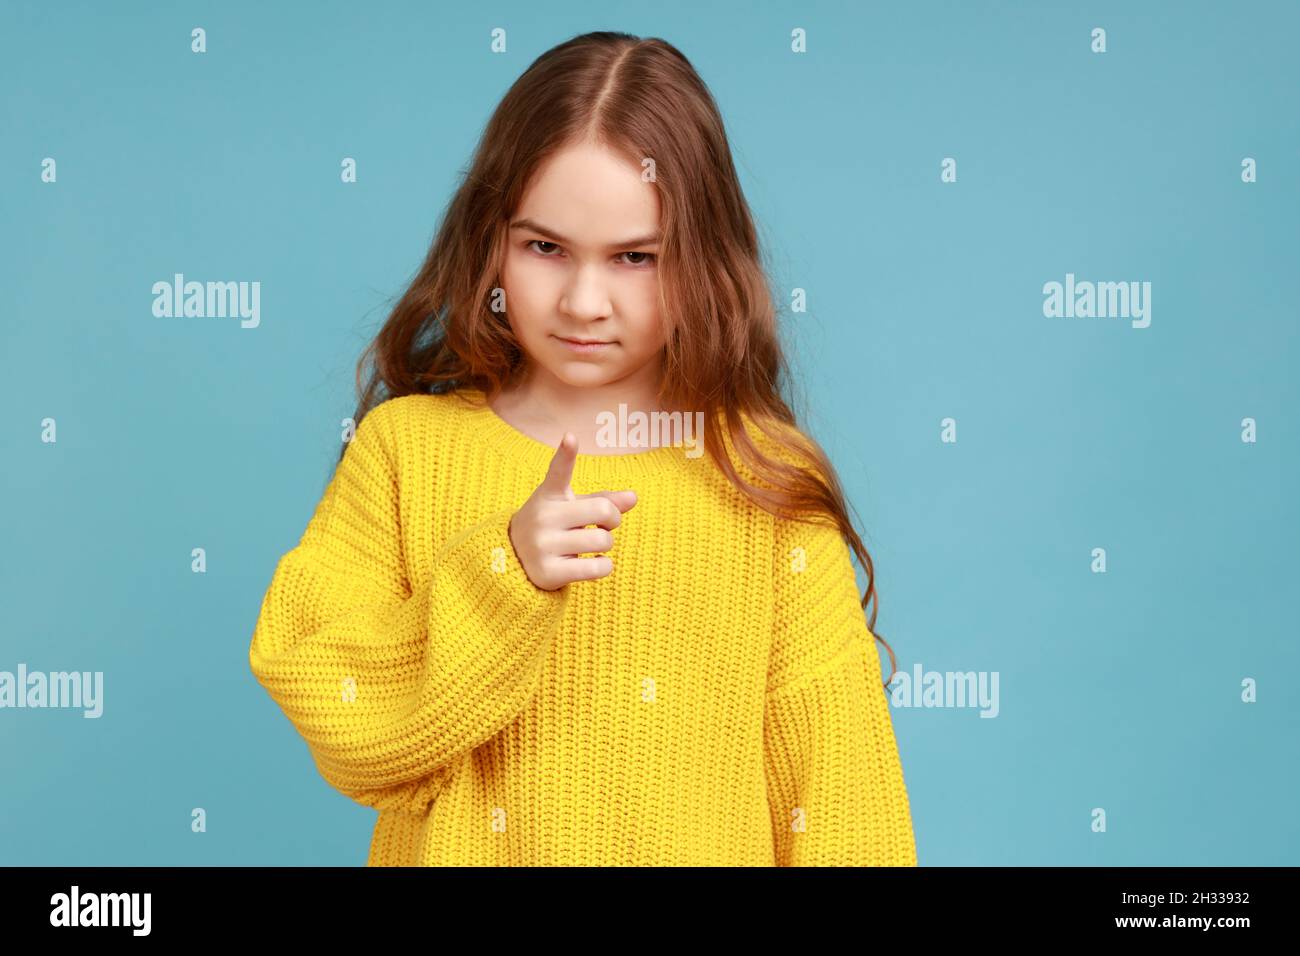 https://c8.alamy.com/comp/2H33932/portrait-of-little-girl-standing-with-admonishing-gesture-warning-looking-with-strict-expression-wearing-yellow-casual-style-sweater-indoor-studio-shot-isolated-on-blue-background-2H33932.jpg